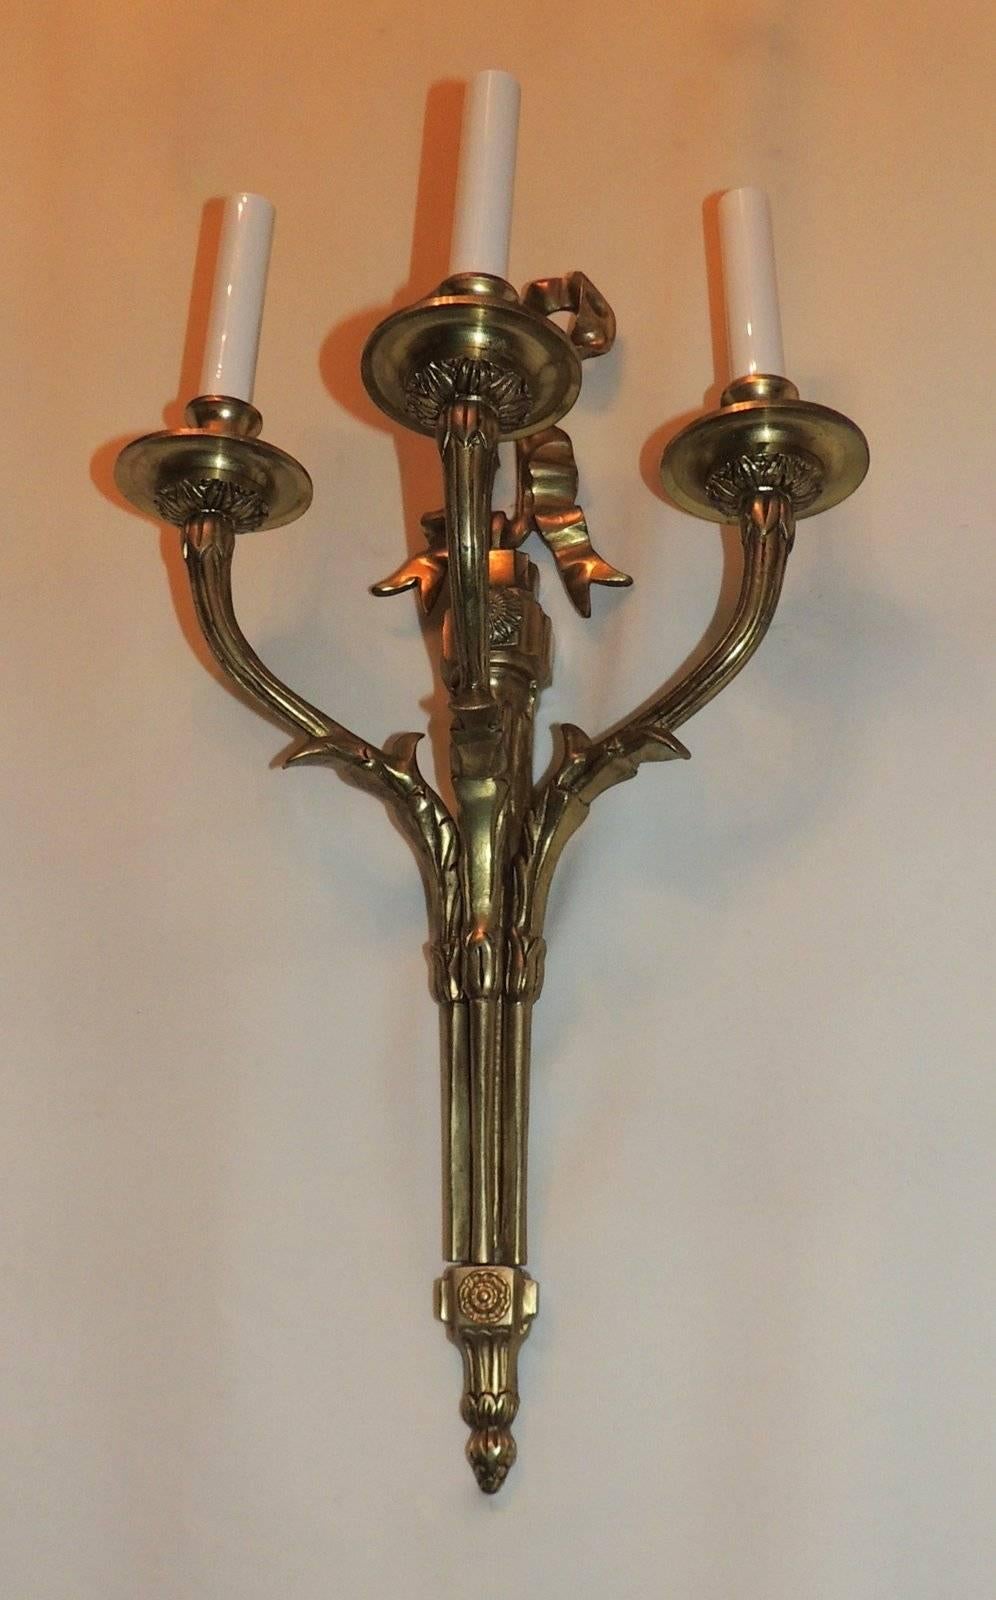 Elegant set of six (three Pair) of gilt bronze three arm French Sconces with bow top and rosette detail. The three arms are decorated with filigree detail.

Sold per pair
Three pairs available

Measures: 21